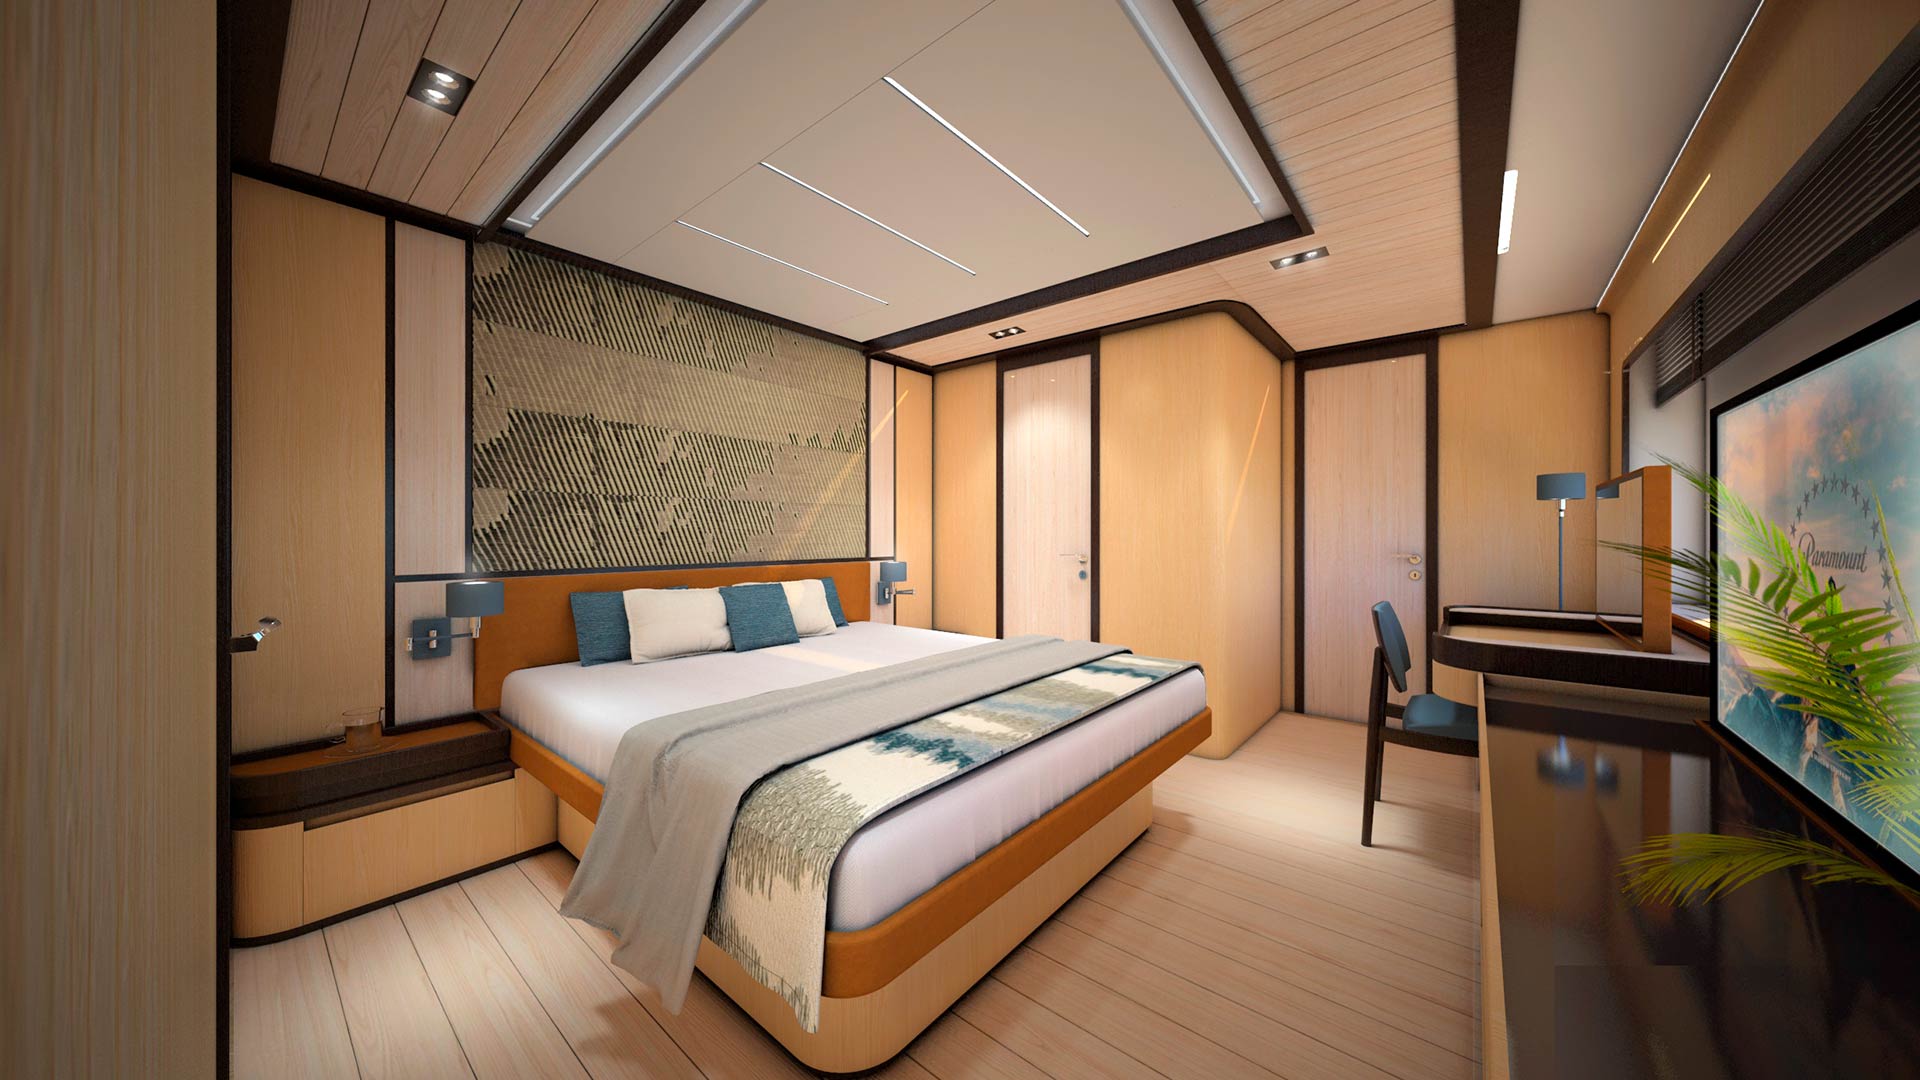 Luxurious bedroom cabin on a eco-friendly yacht